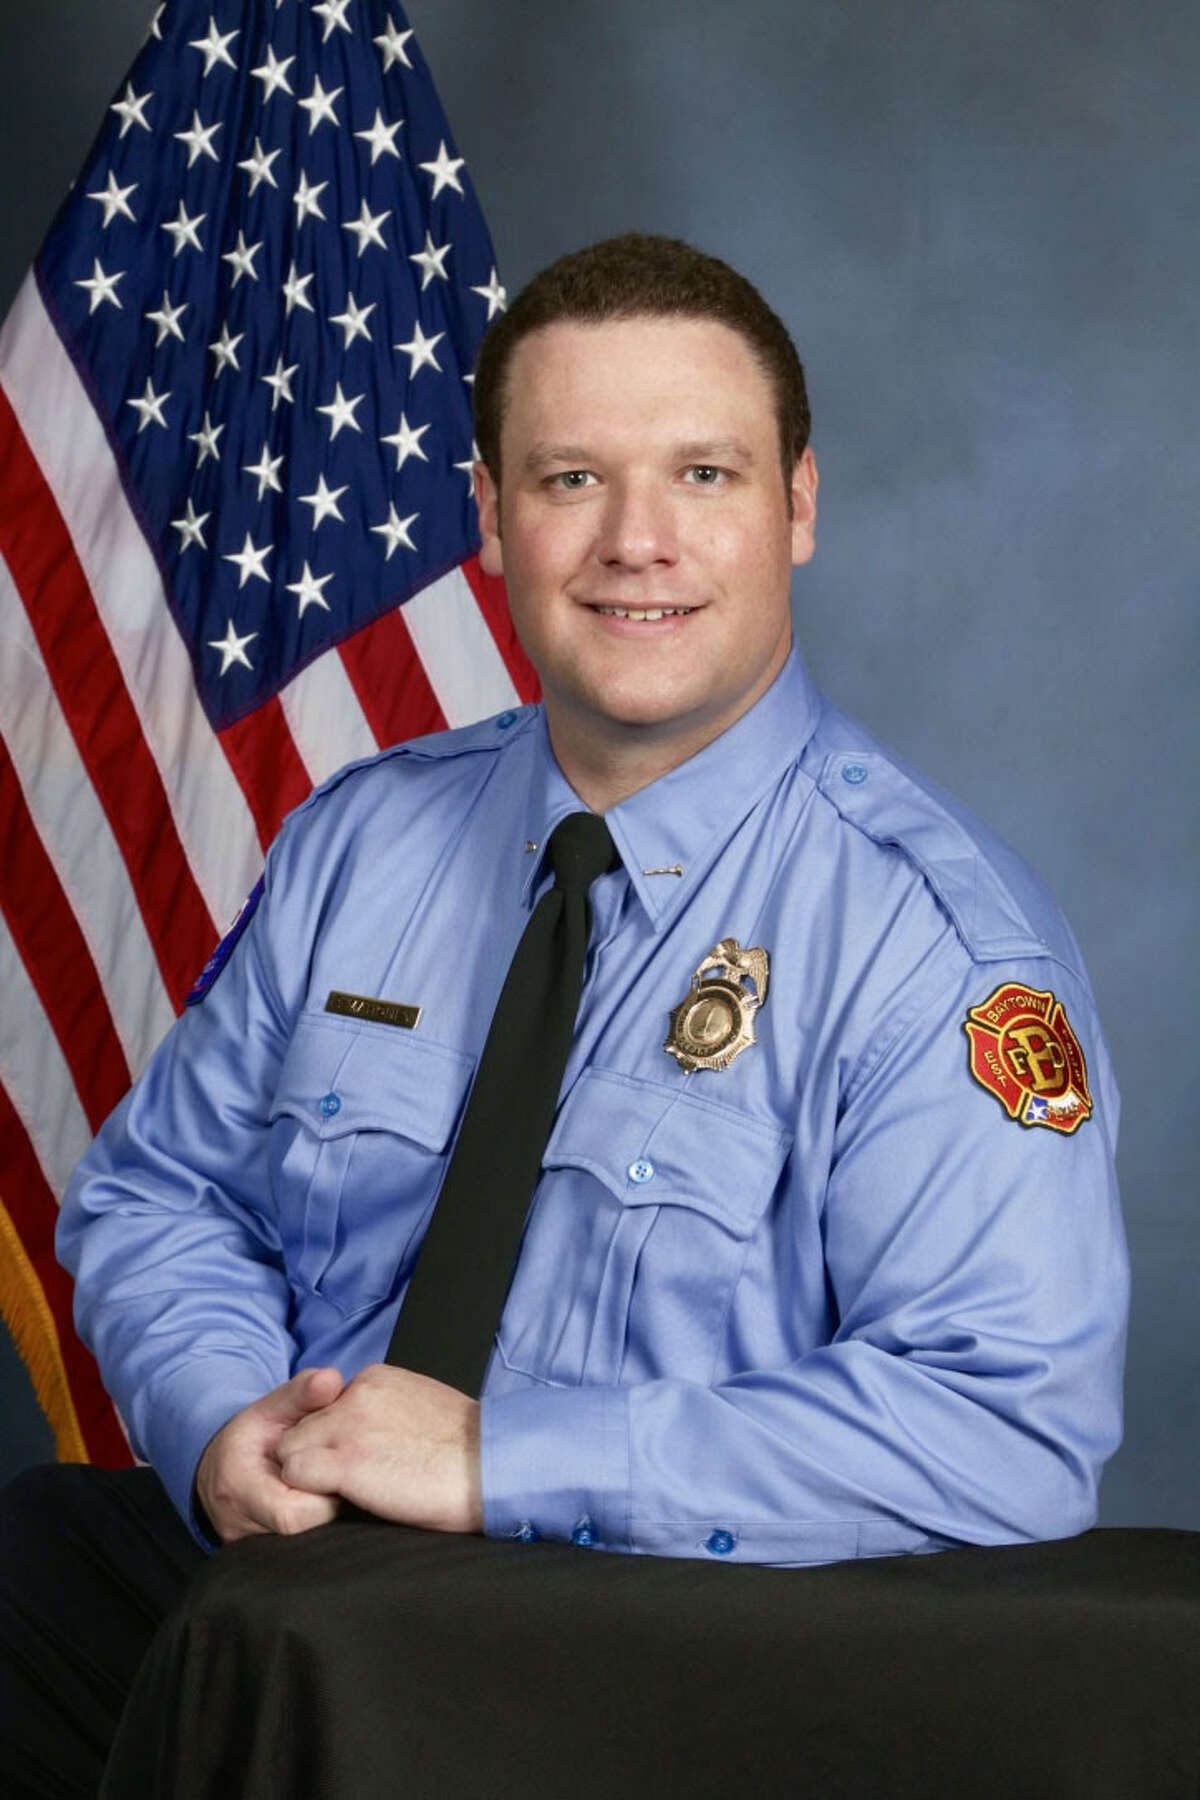 Patrick Mahoney, a battalion chief, has worked for the Baytown Fire Department since 2002.